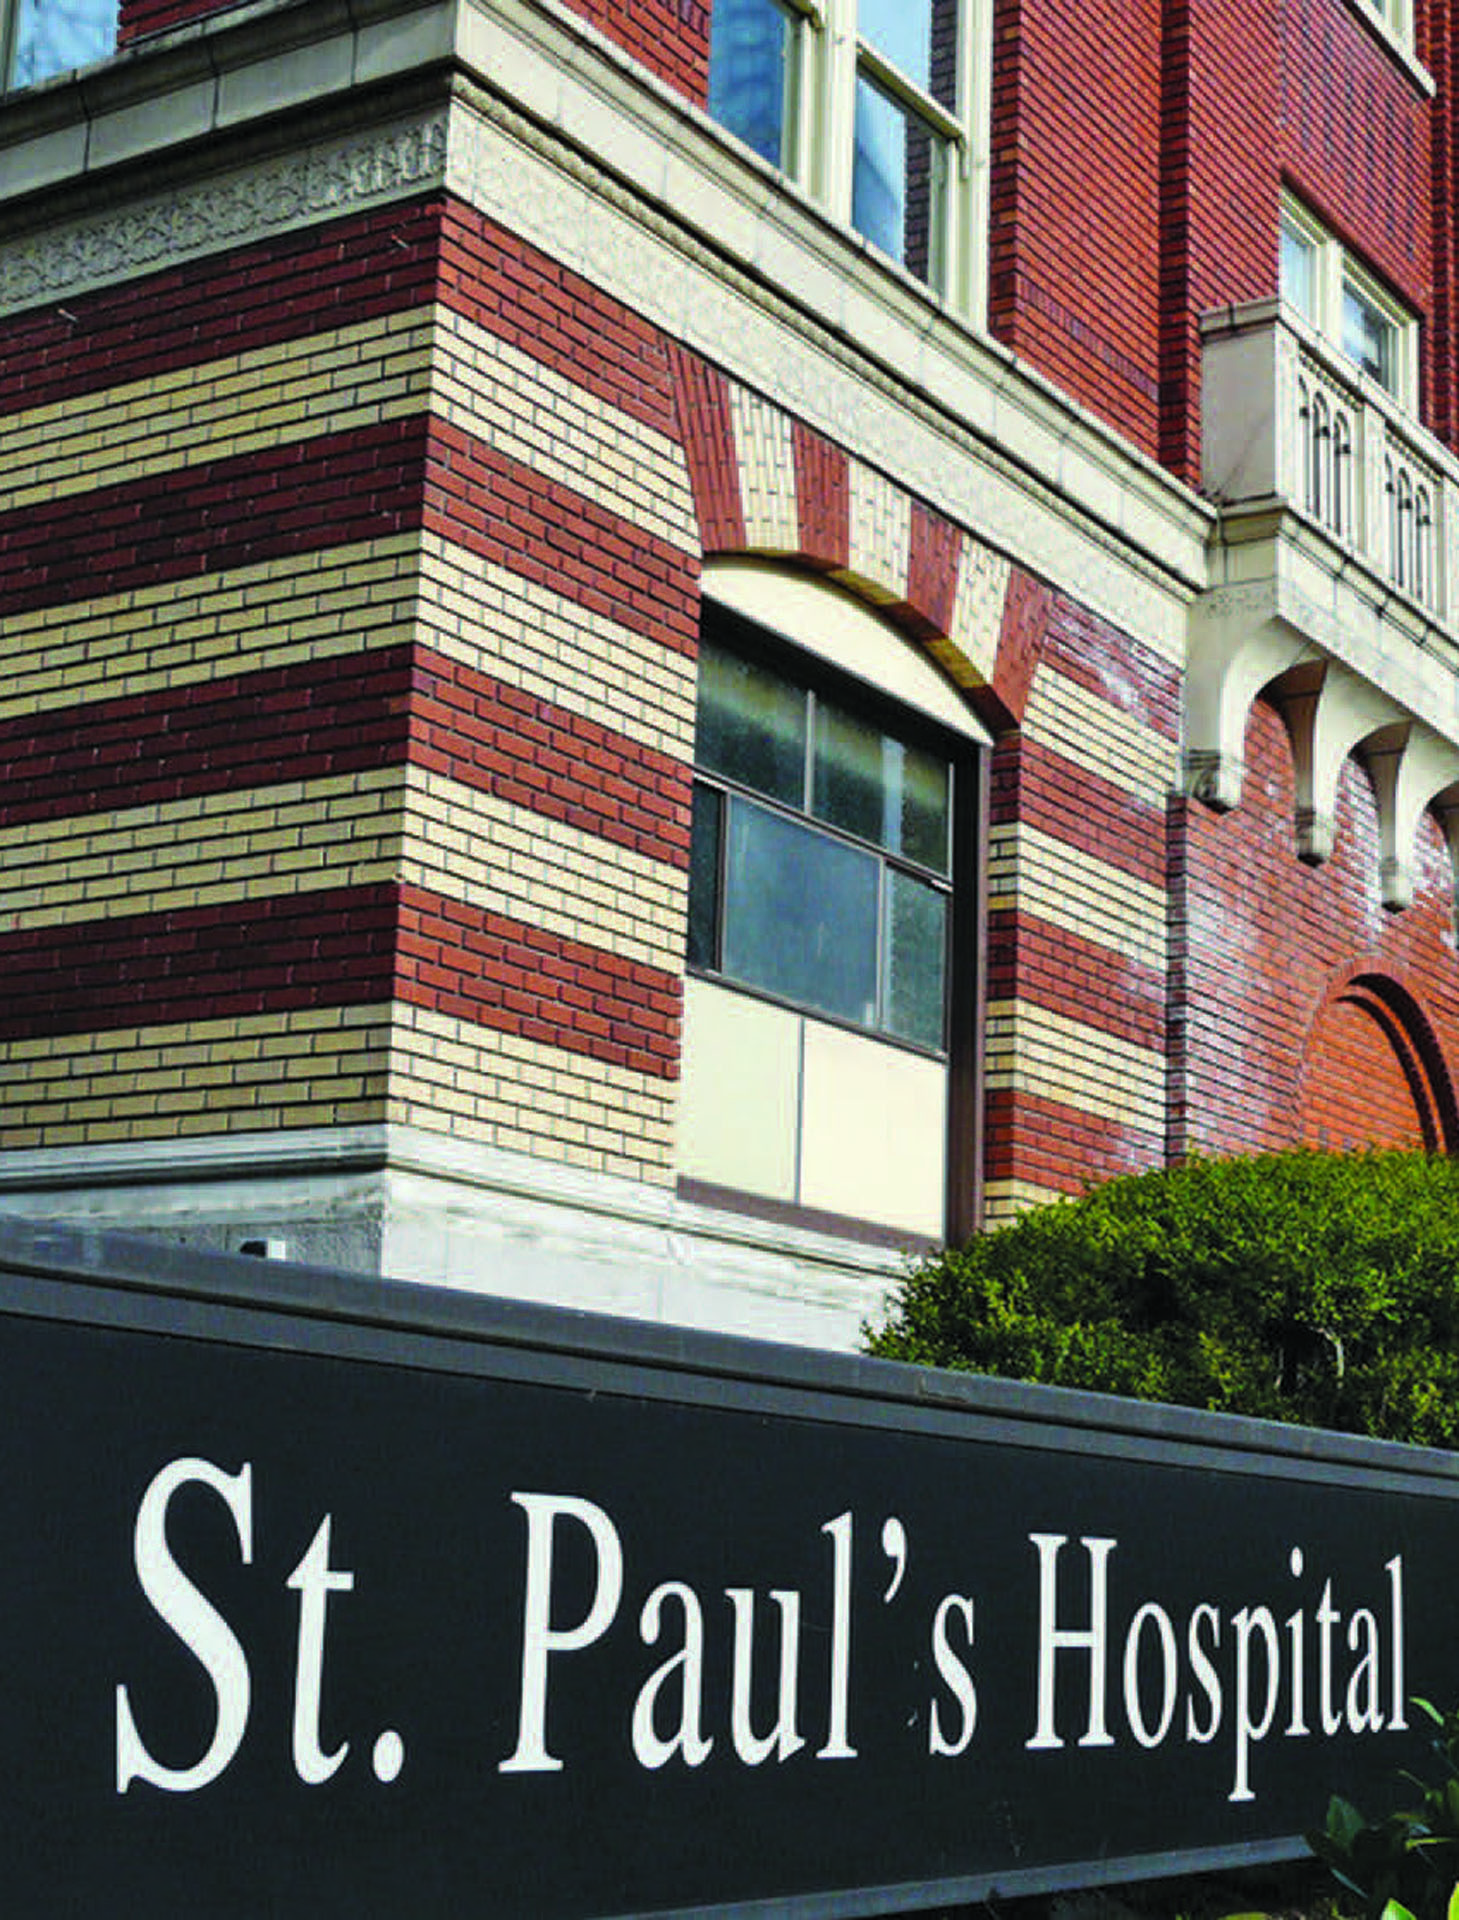 Exterior view of St. Pauls Hospital